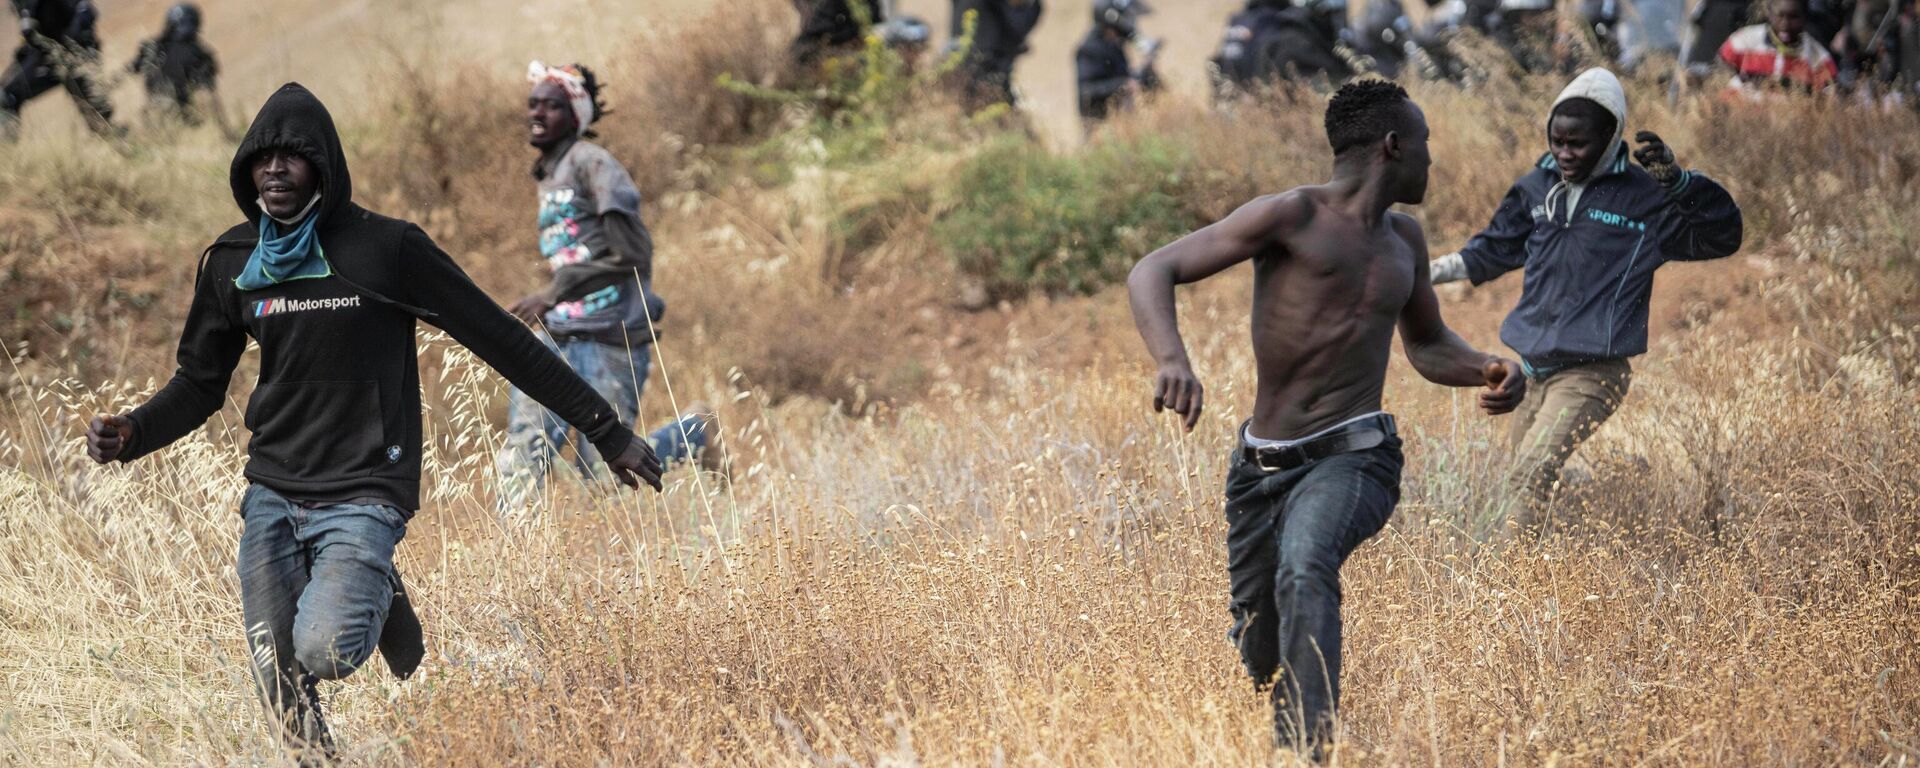 Migrants run on Spanish soil after crossing the fences separating the Spanish enclave of Melilla from Morocco in Melilla, Spain, Friday, June 24, 2022 - Sputnik International, 1920, 24.06.2022